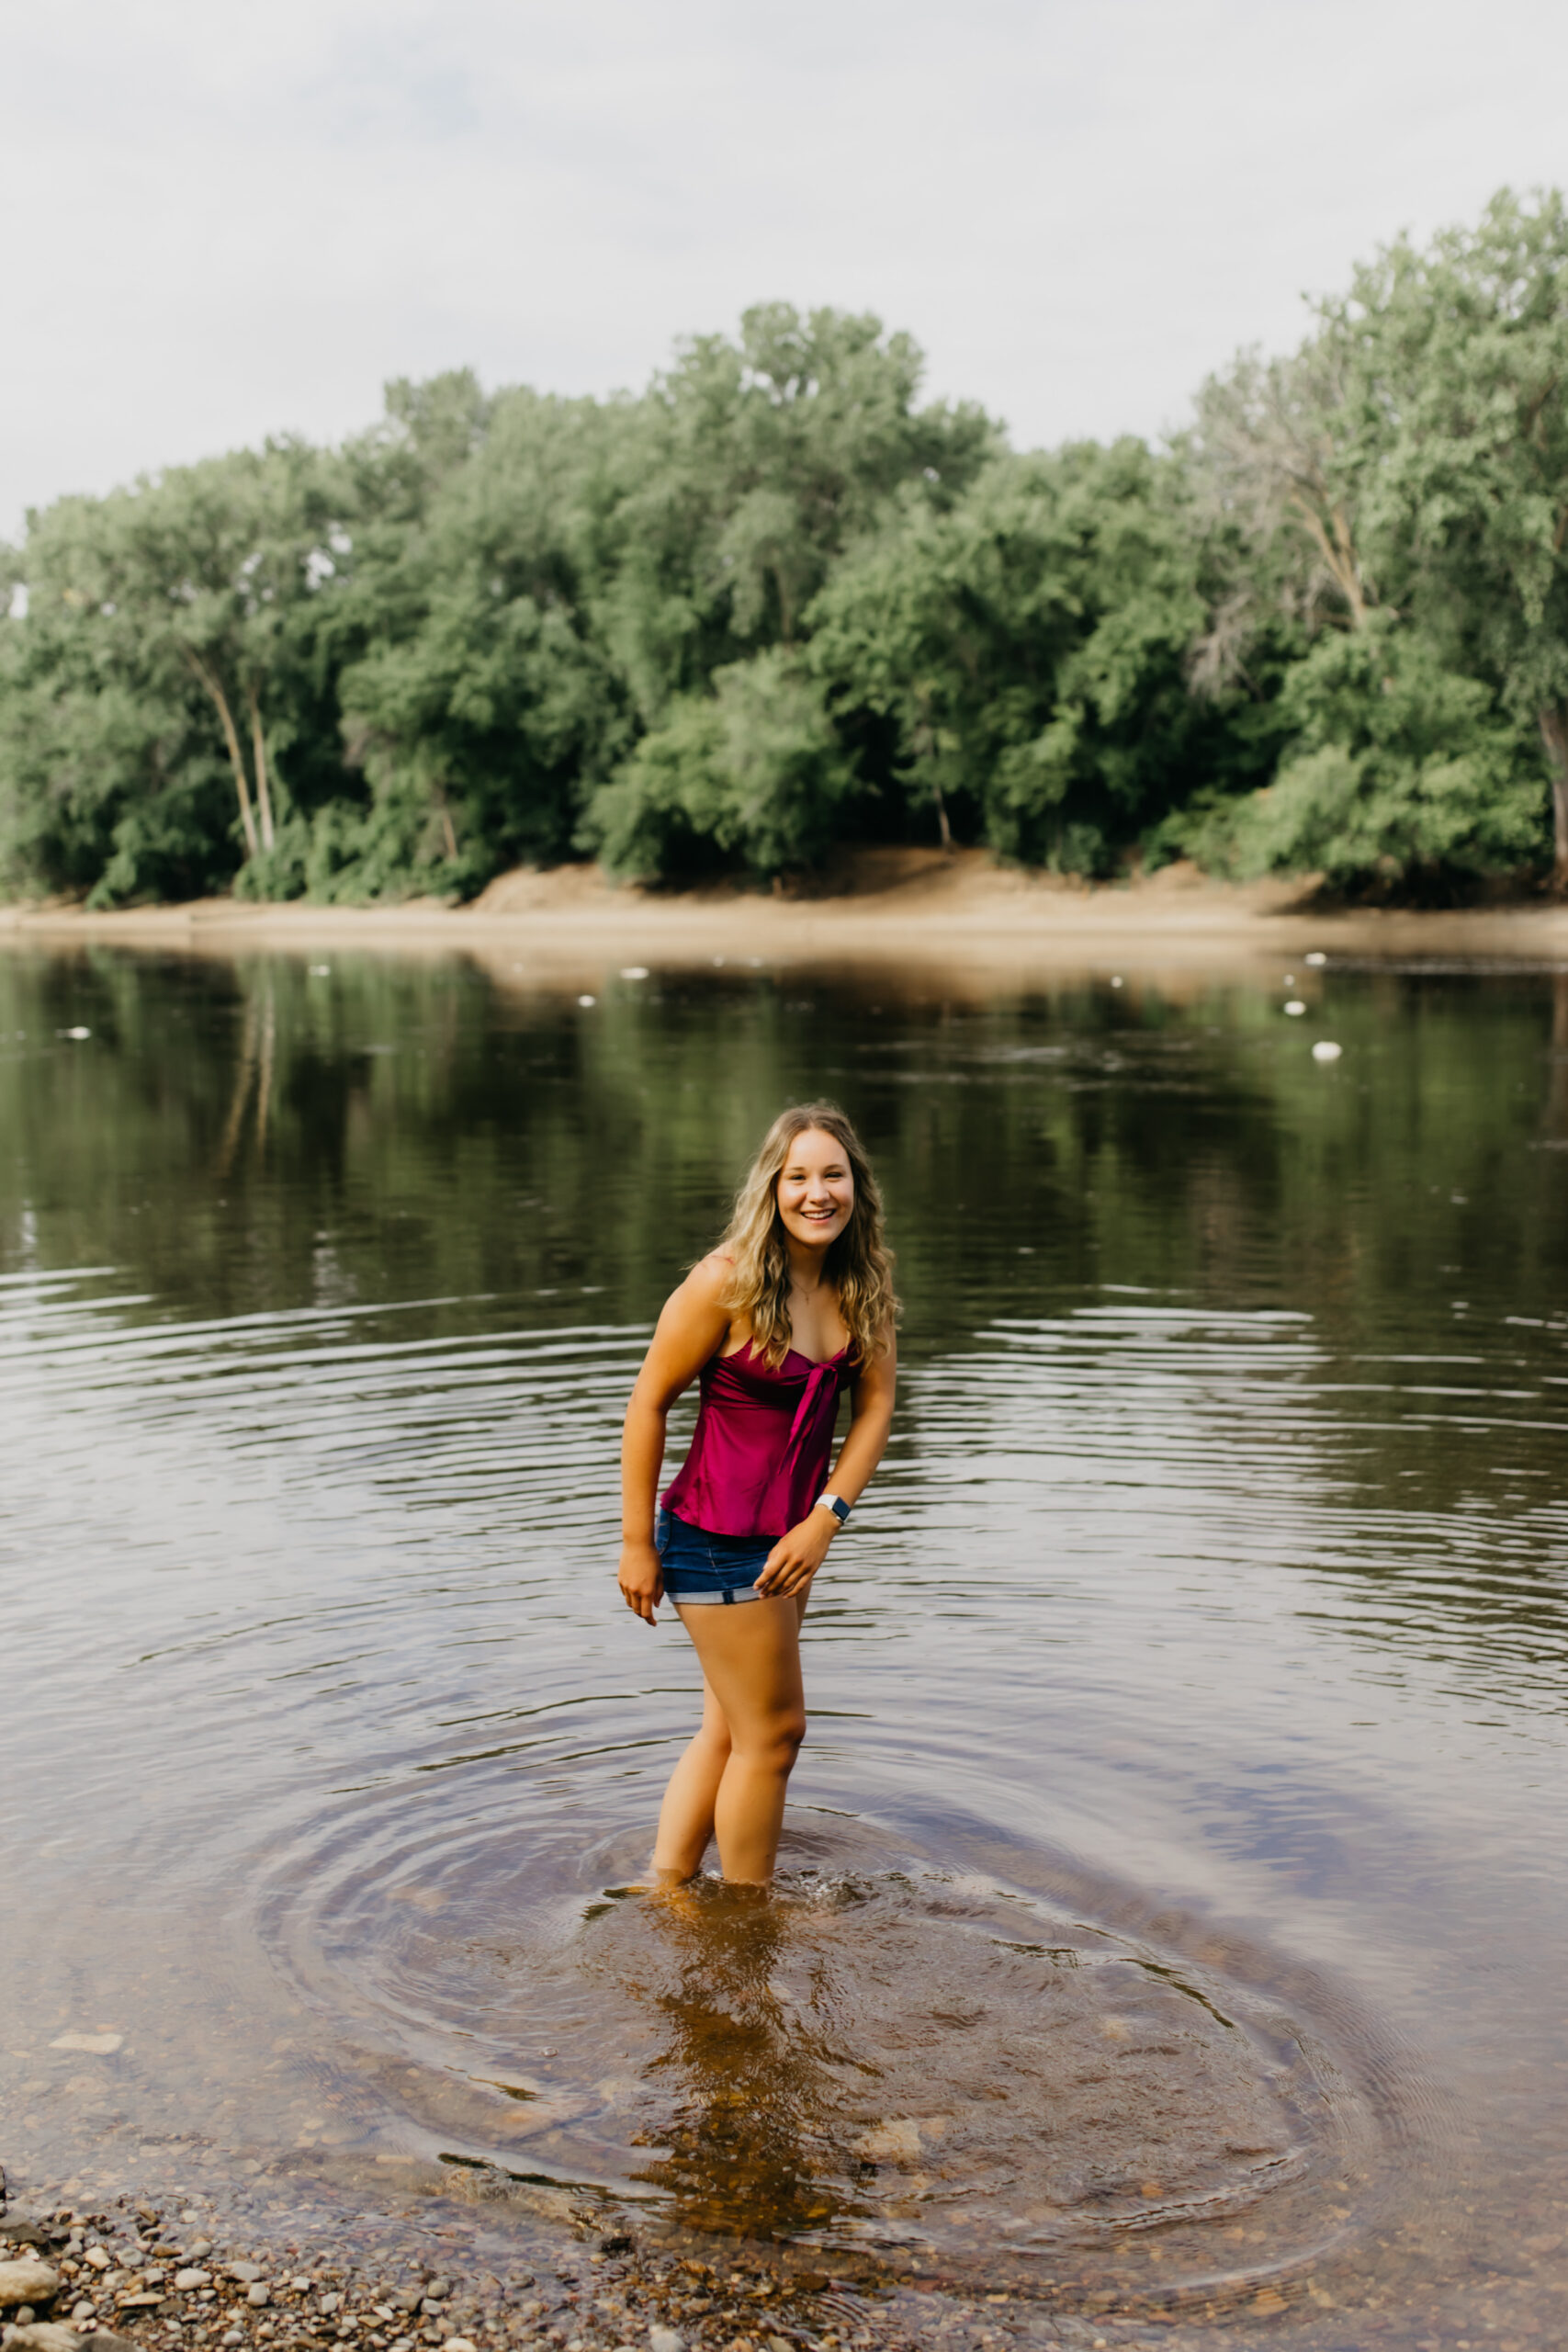 Photo of a Visitation School senior at the lake with her purple top